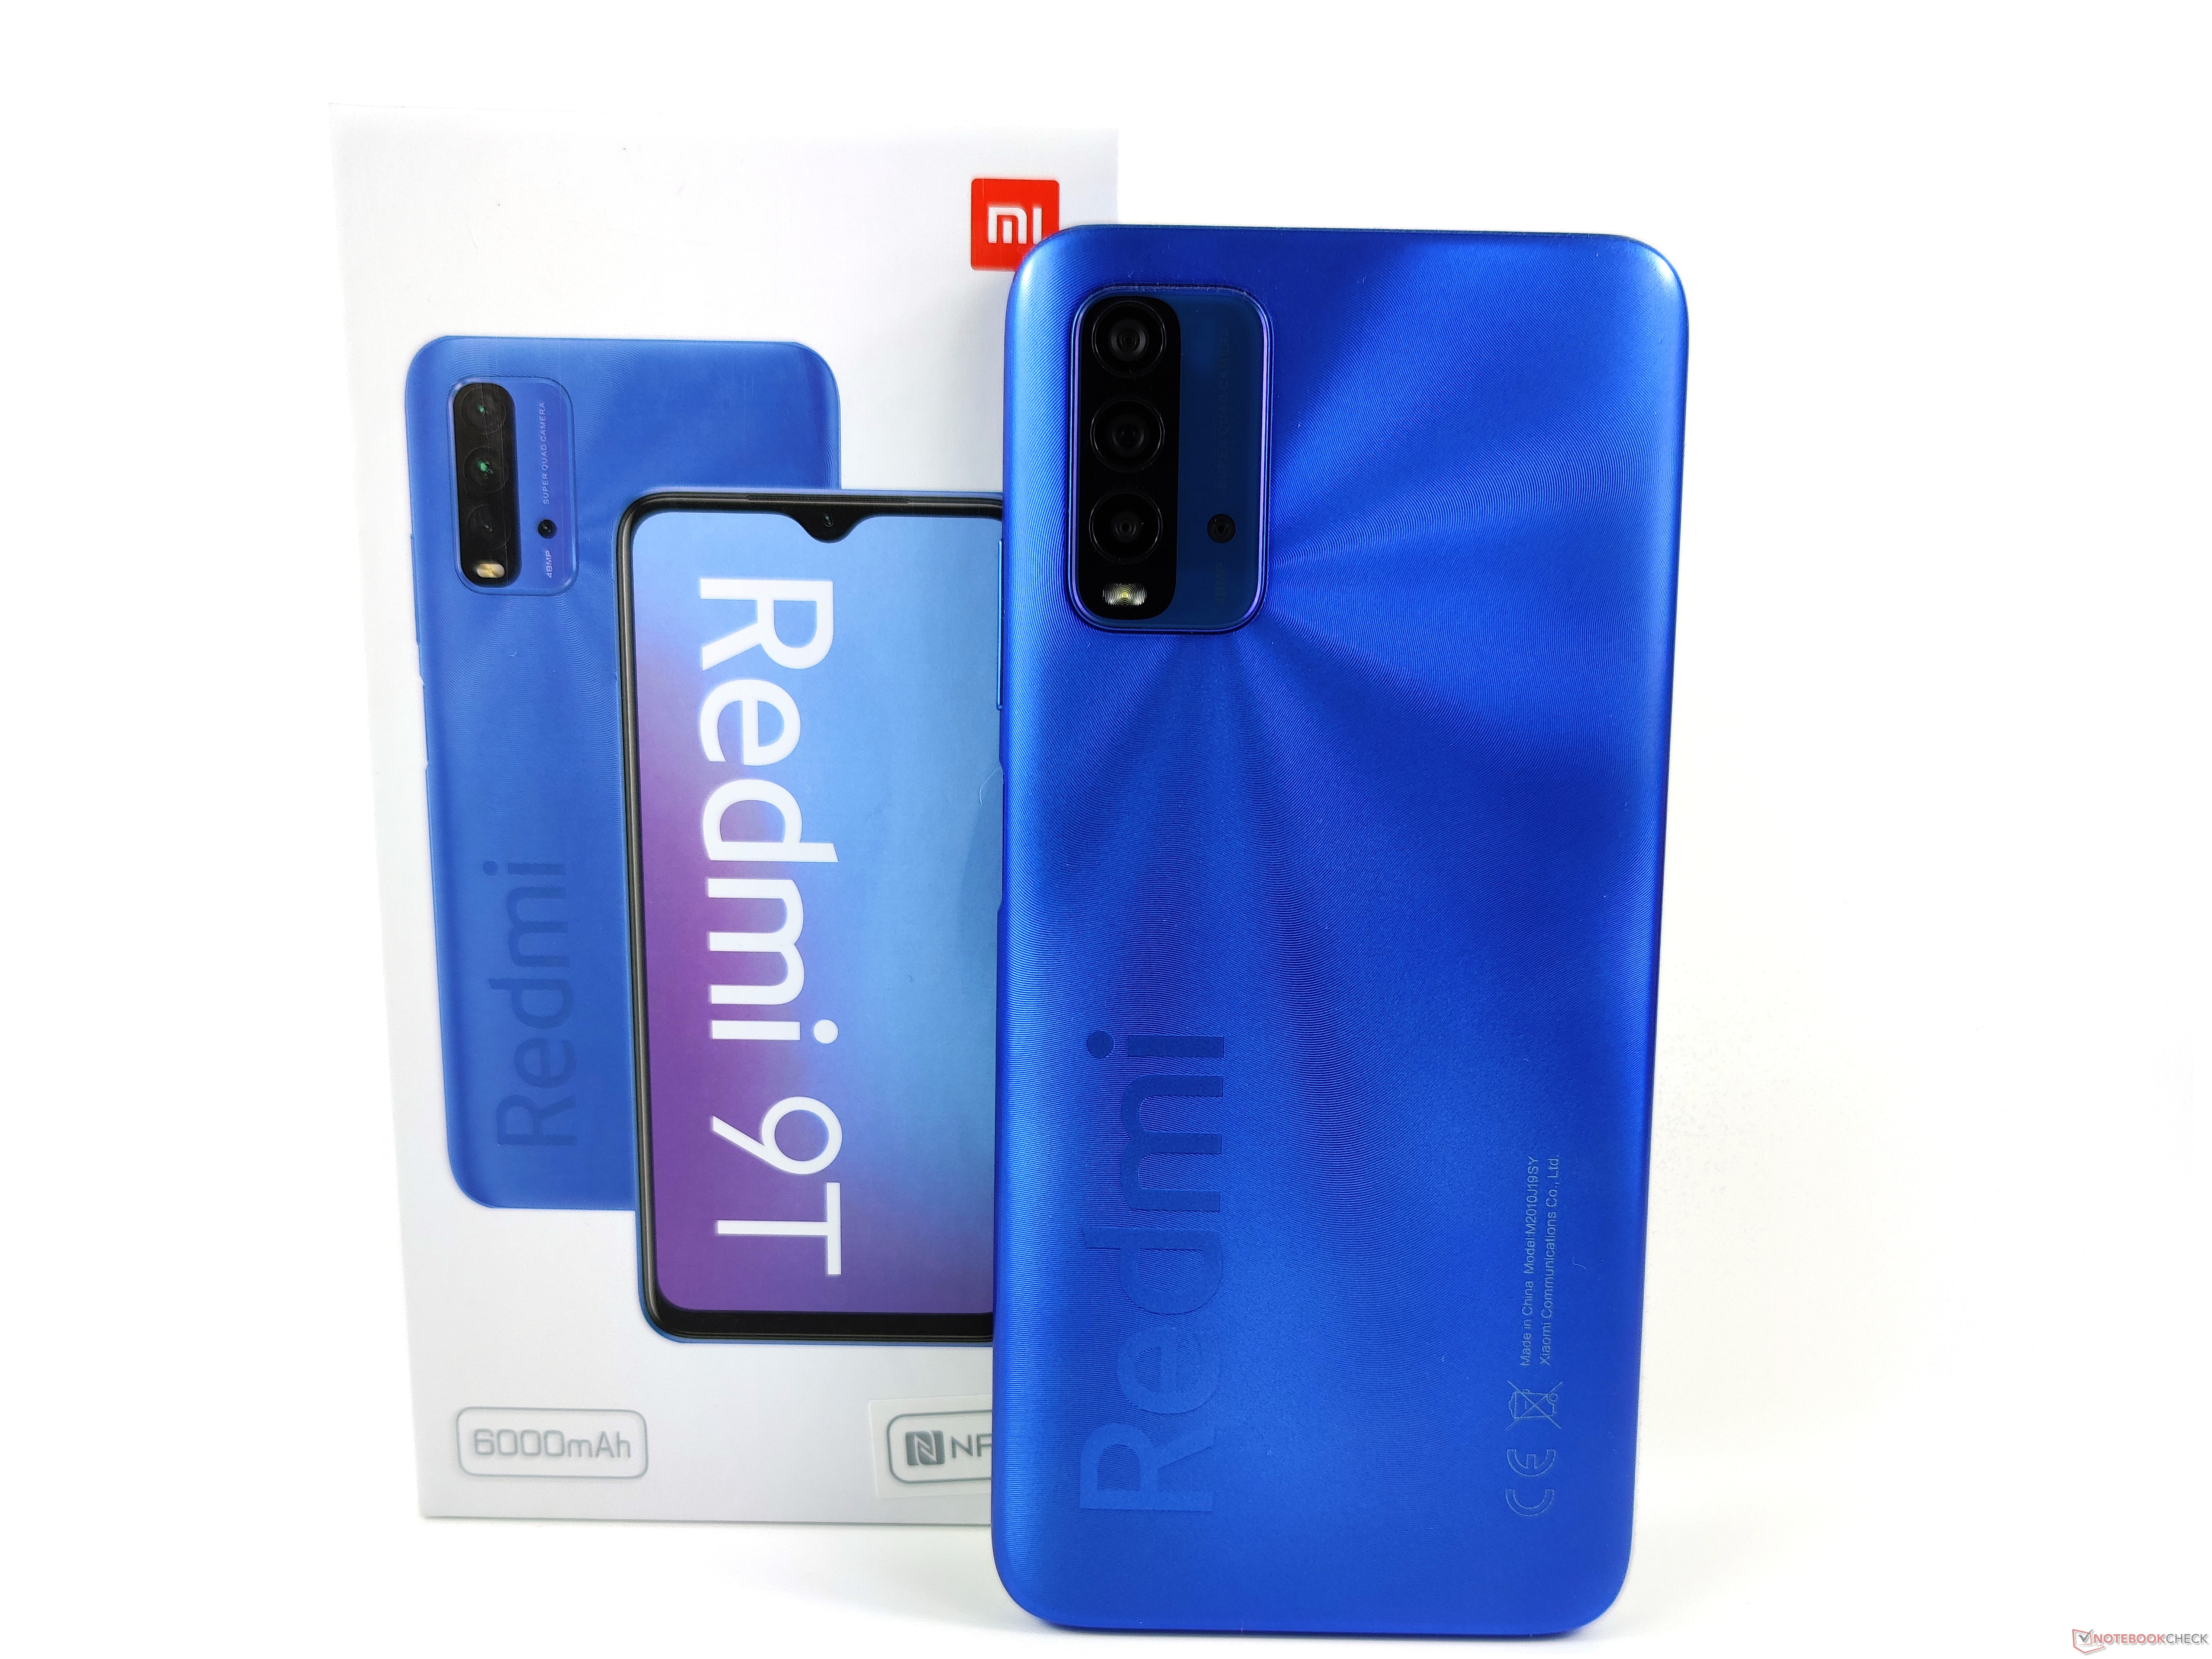 Xiaomi Redmi 9T review: Entry-level smartphone with huge battery